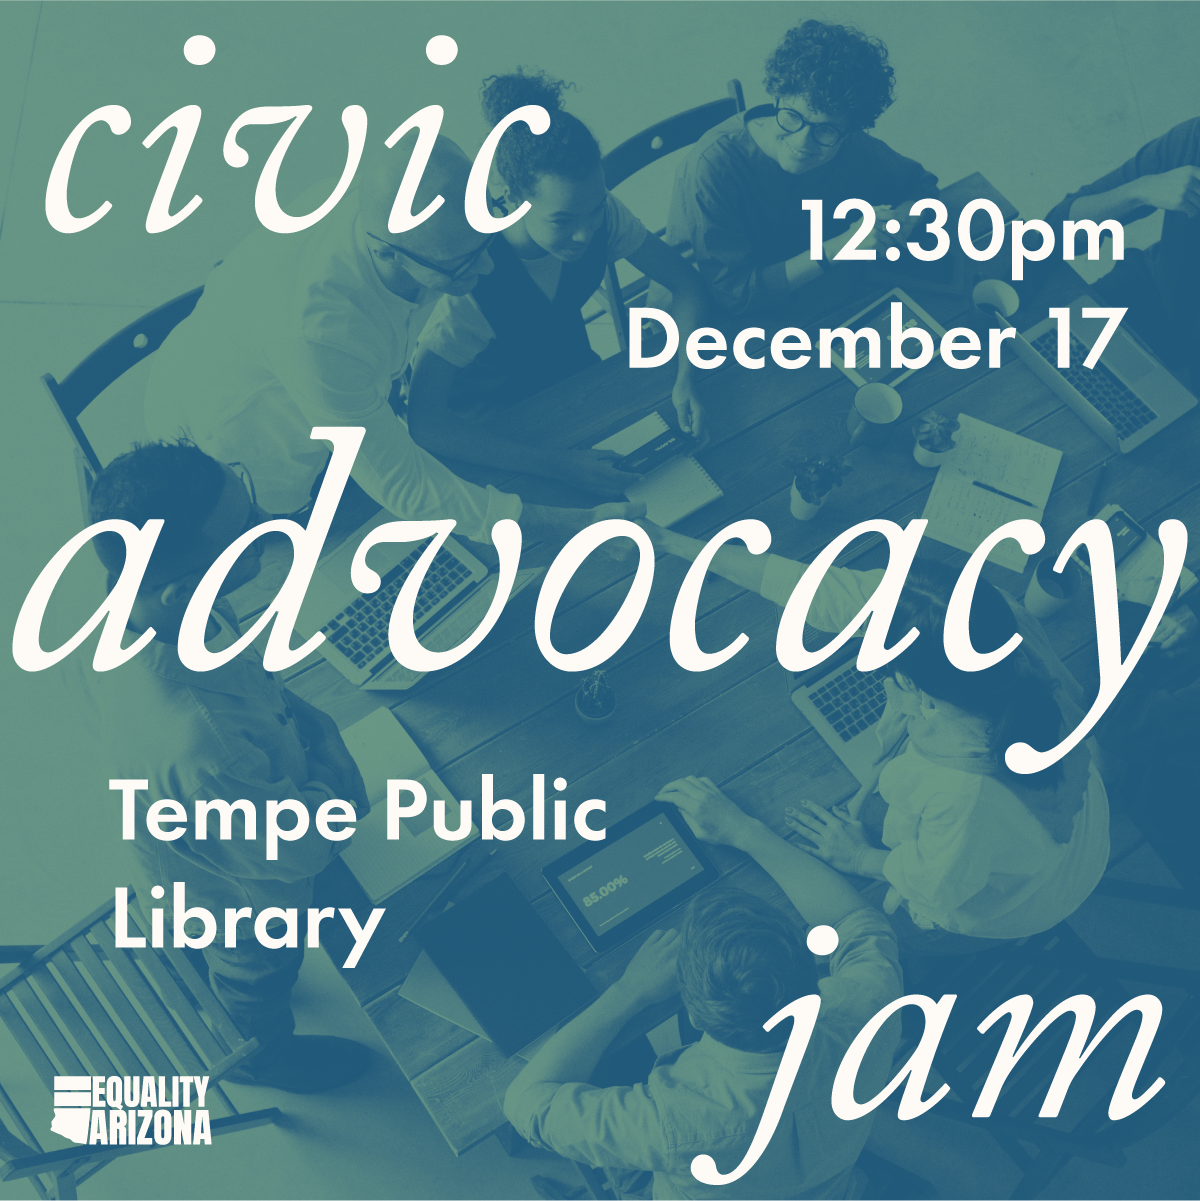 On a green tinted photo of a diverse group of people working together at a conference table, large text reads “Civic Advocacy Jam.” The date and location are also listed on the image: “12:30 PM, December 17. Tempe Public Library.” In the bottom left corner there is a small logo for Equality Arizona.